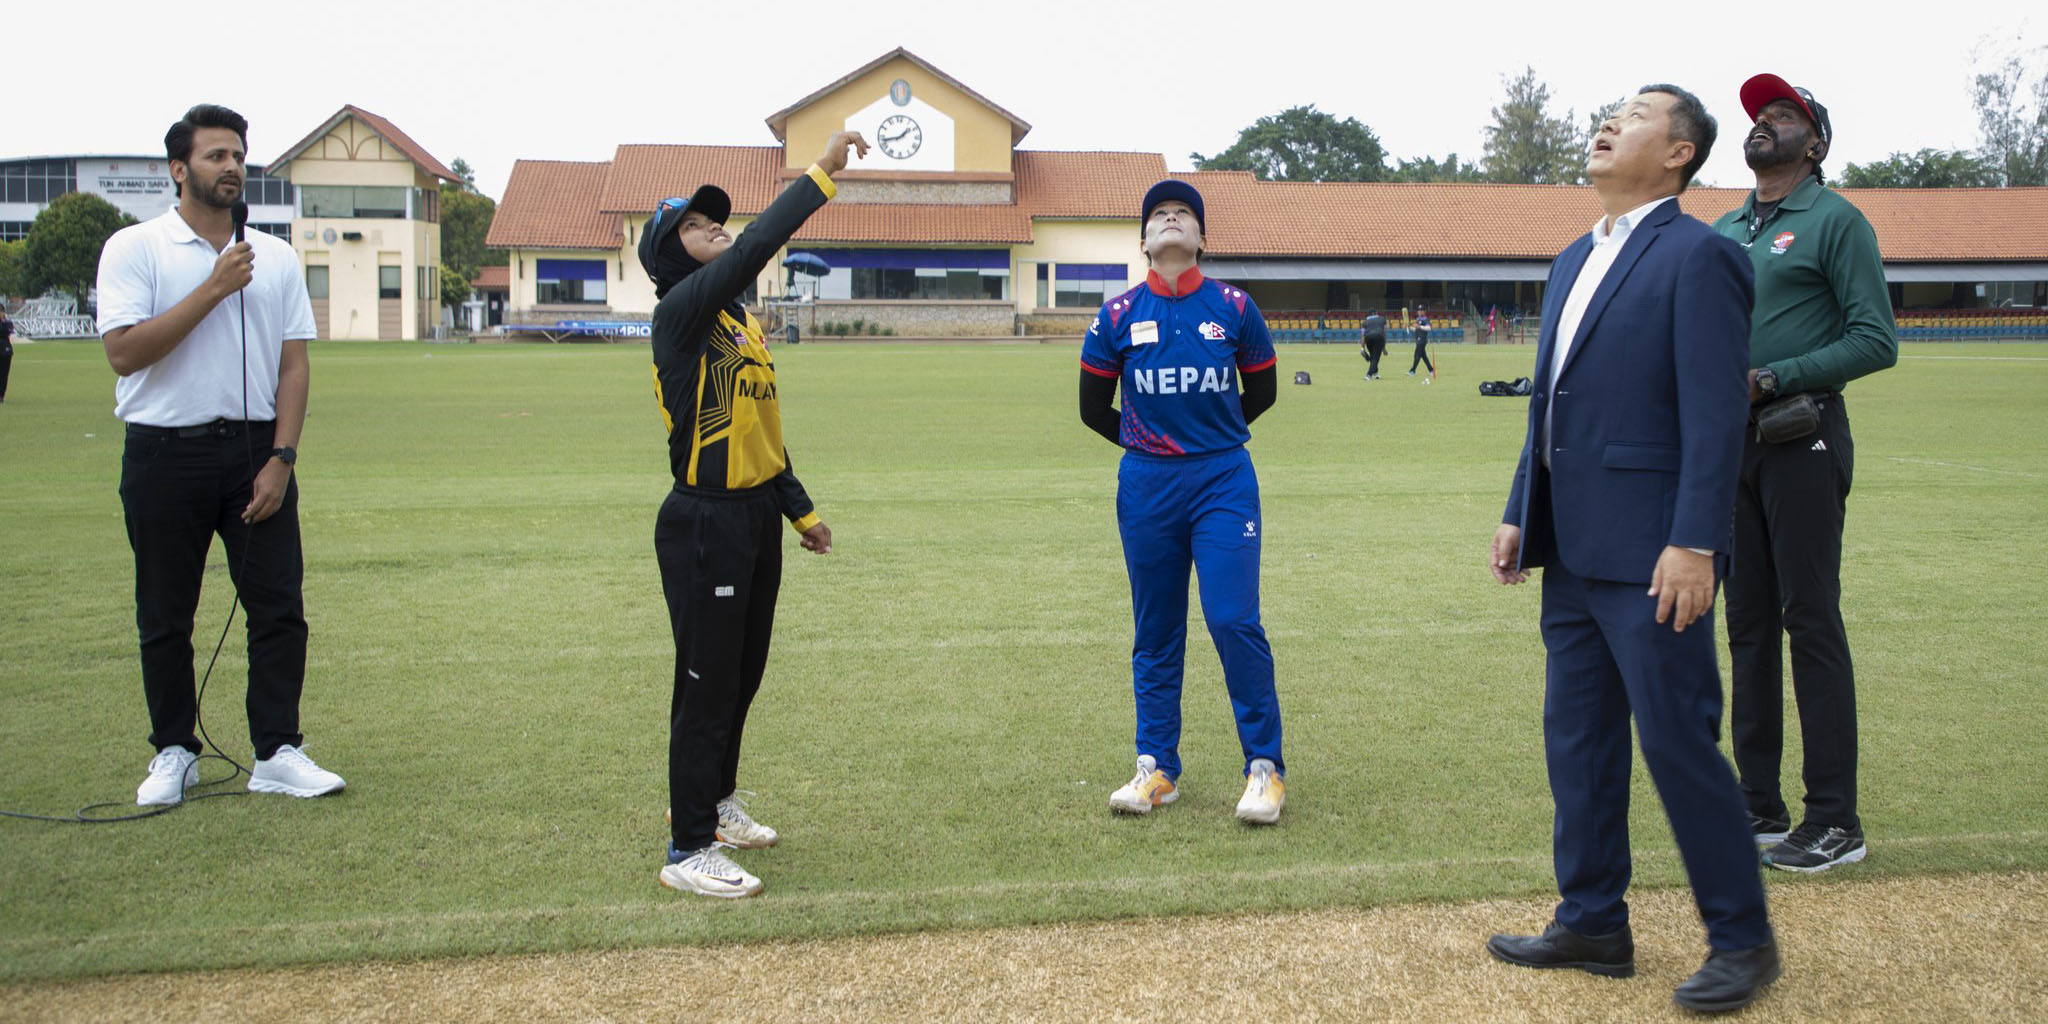 Nepal enters final despite suffering a six-wicket loss against Malaysia